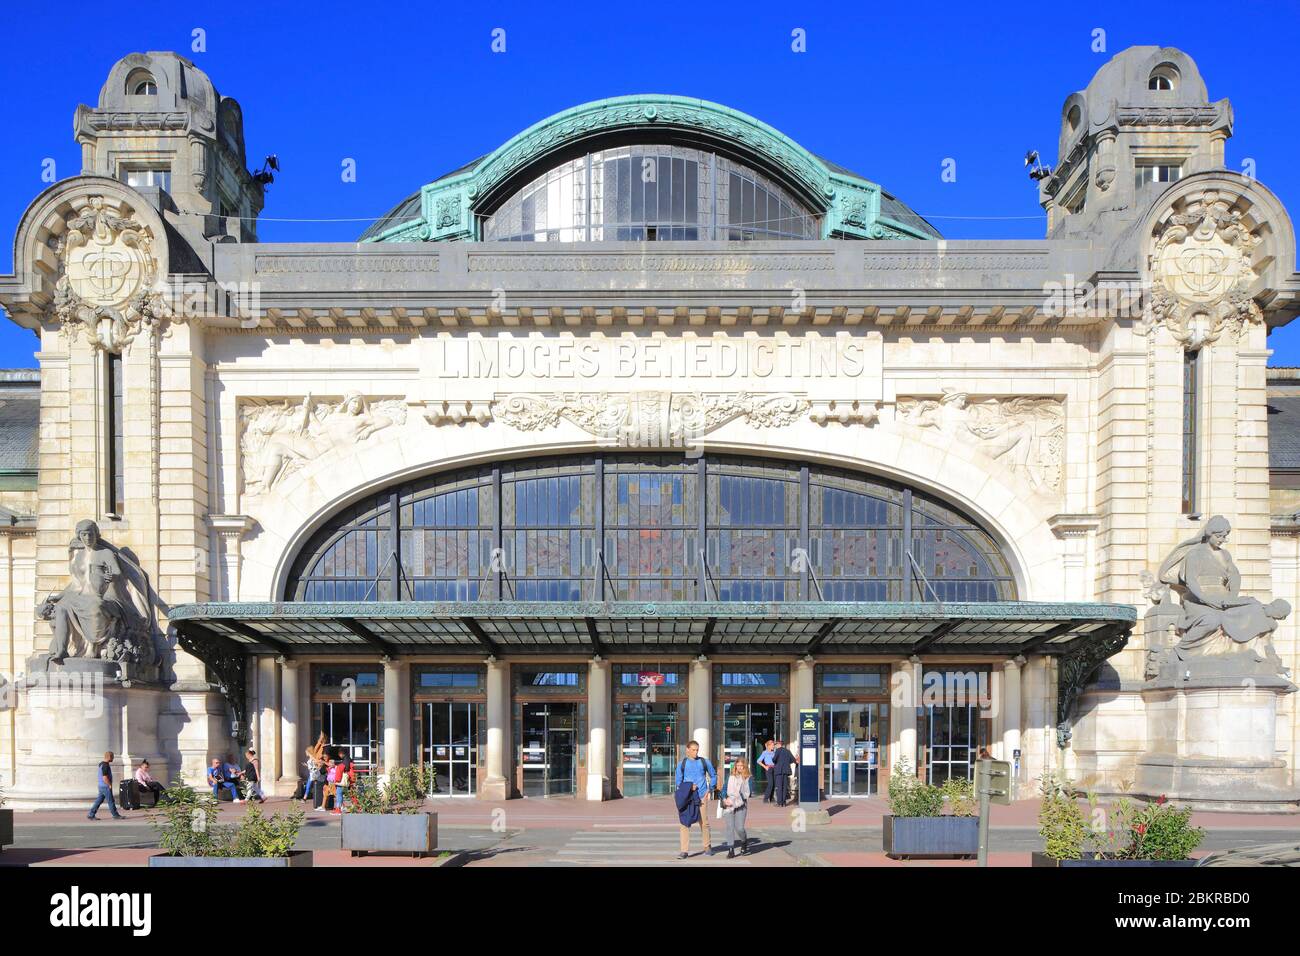 France, Haute Vienne, Limoges, Limoges Benedictins train station inaugurated in 1929 and eclectic masterpiece of regionalist architecture with a mixture of late Art Nouveau, Art Deco and neoclassicism, main entrance Stock Photo